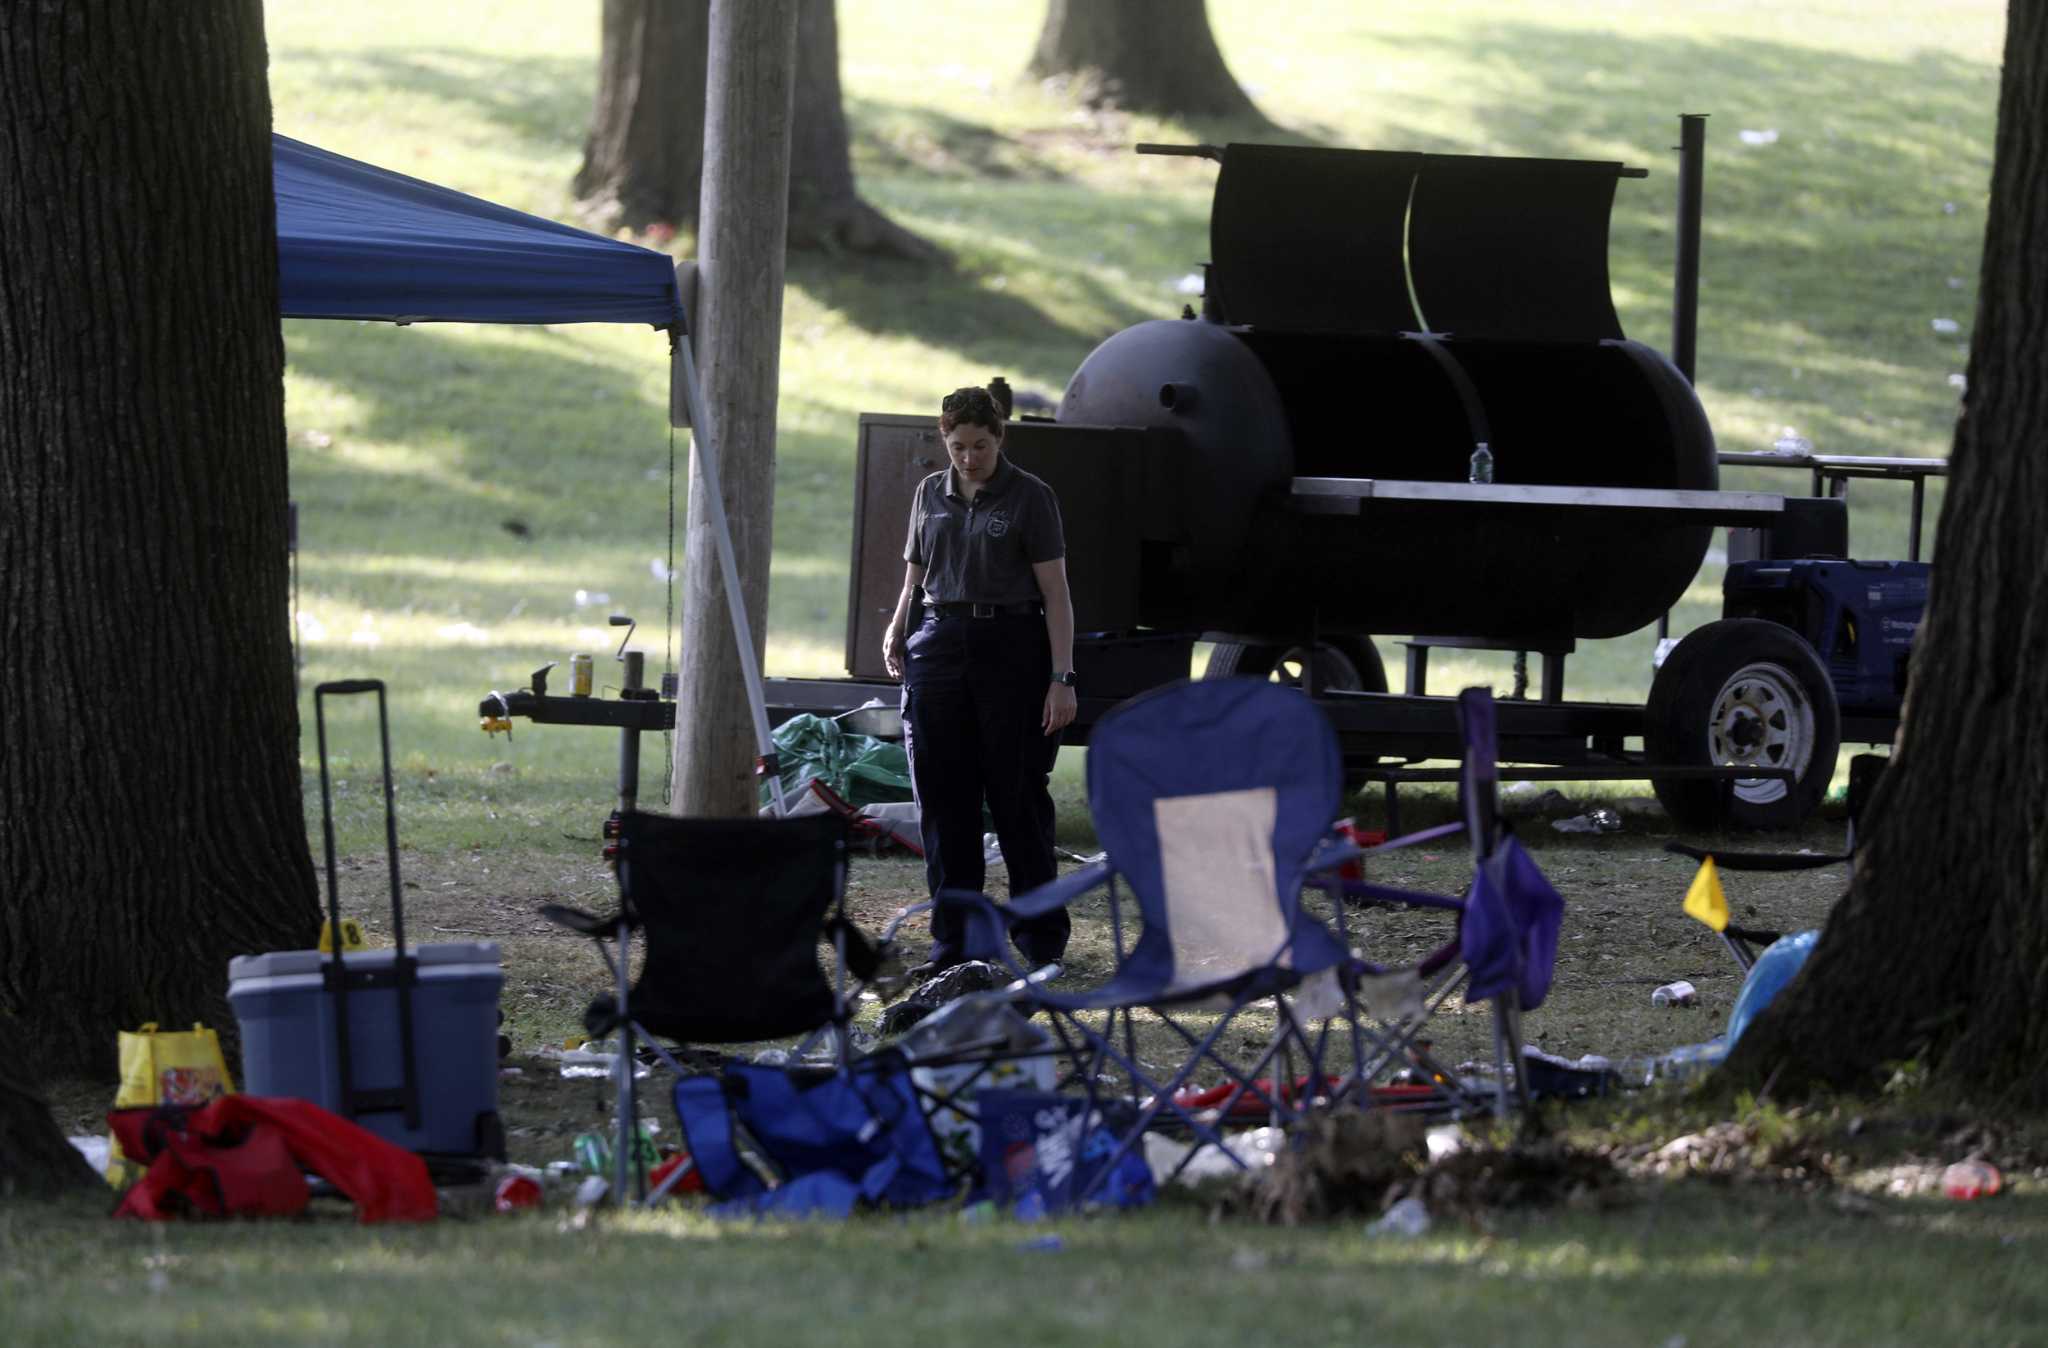 7 people shot, 2 fatally, at a park in upstate Rochester, NY